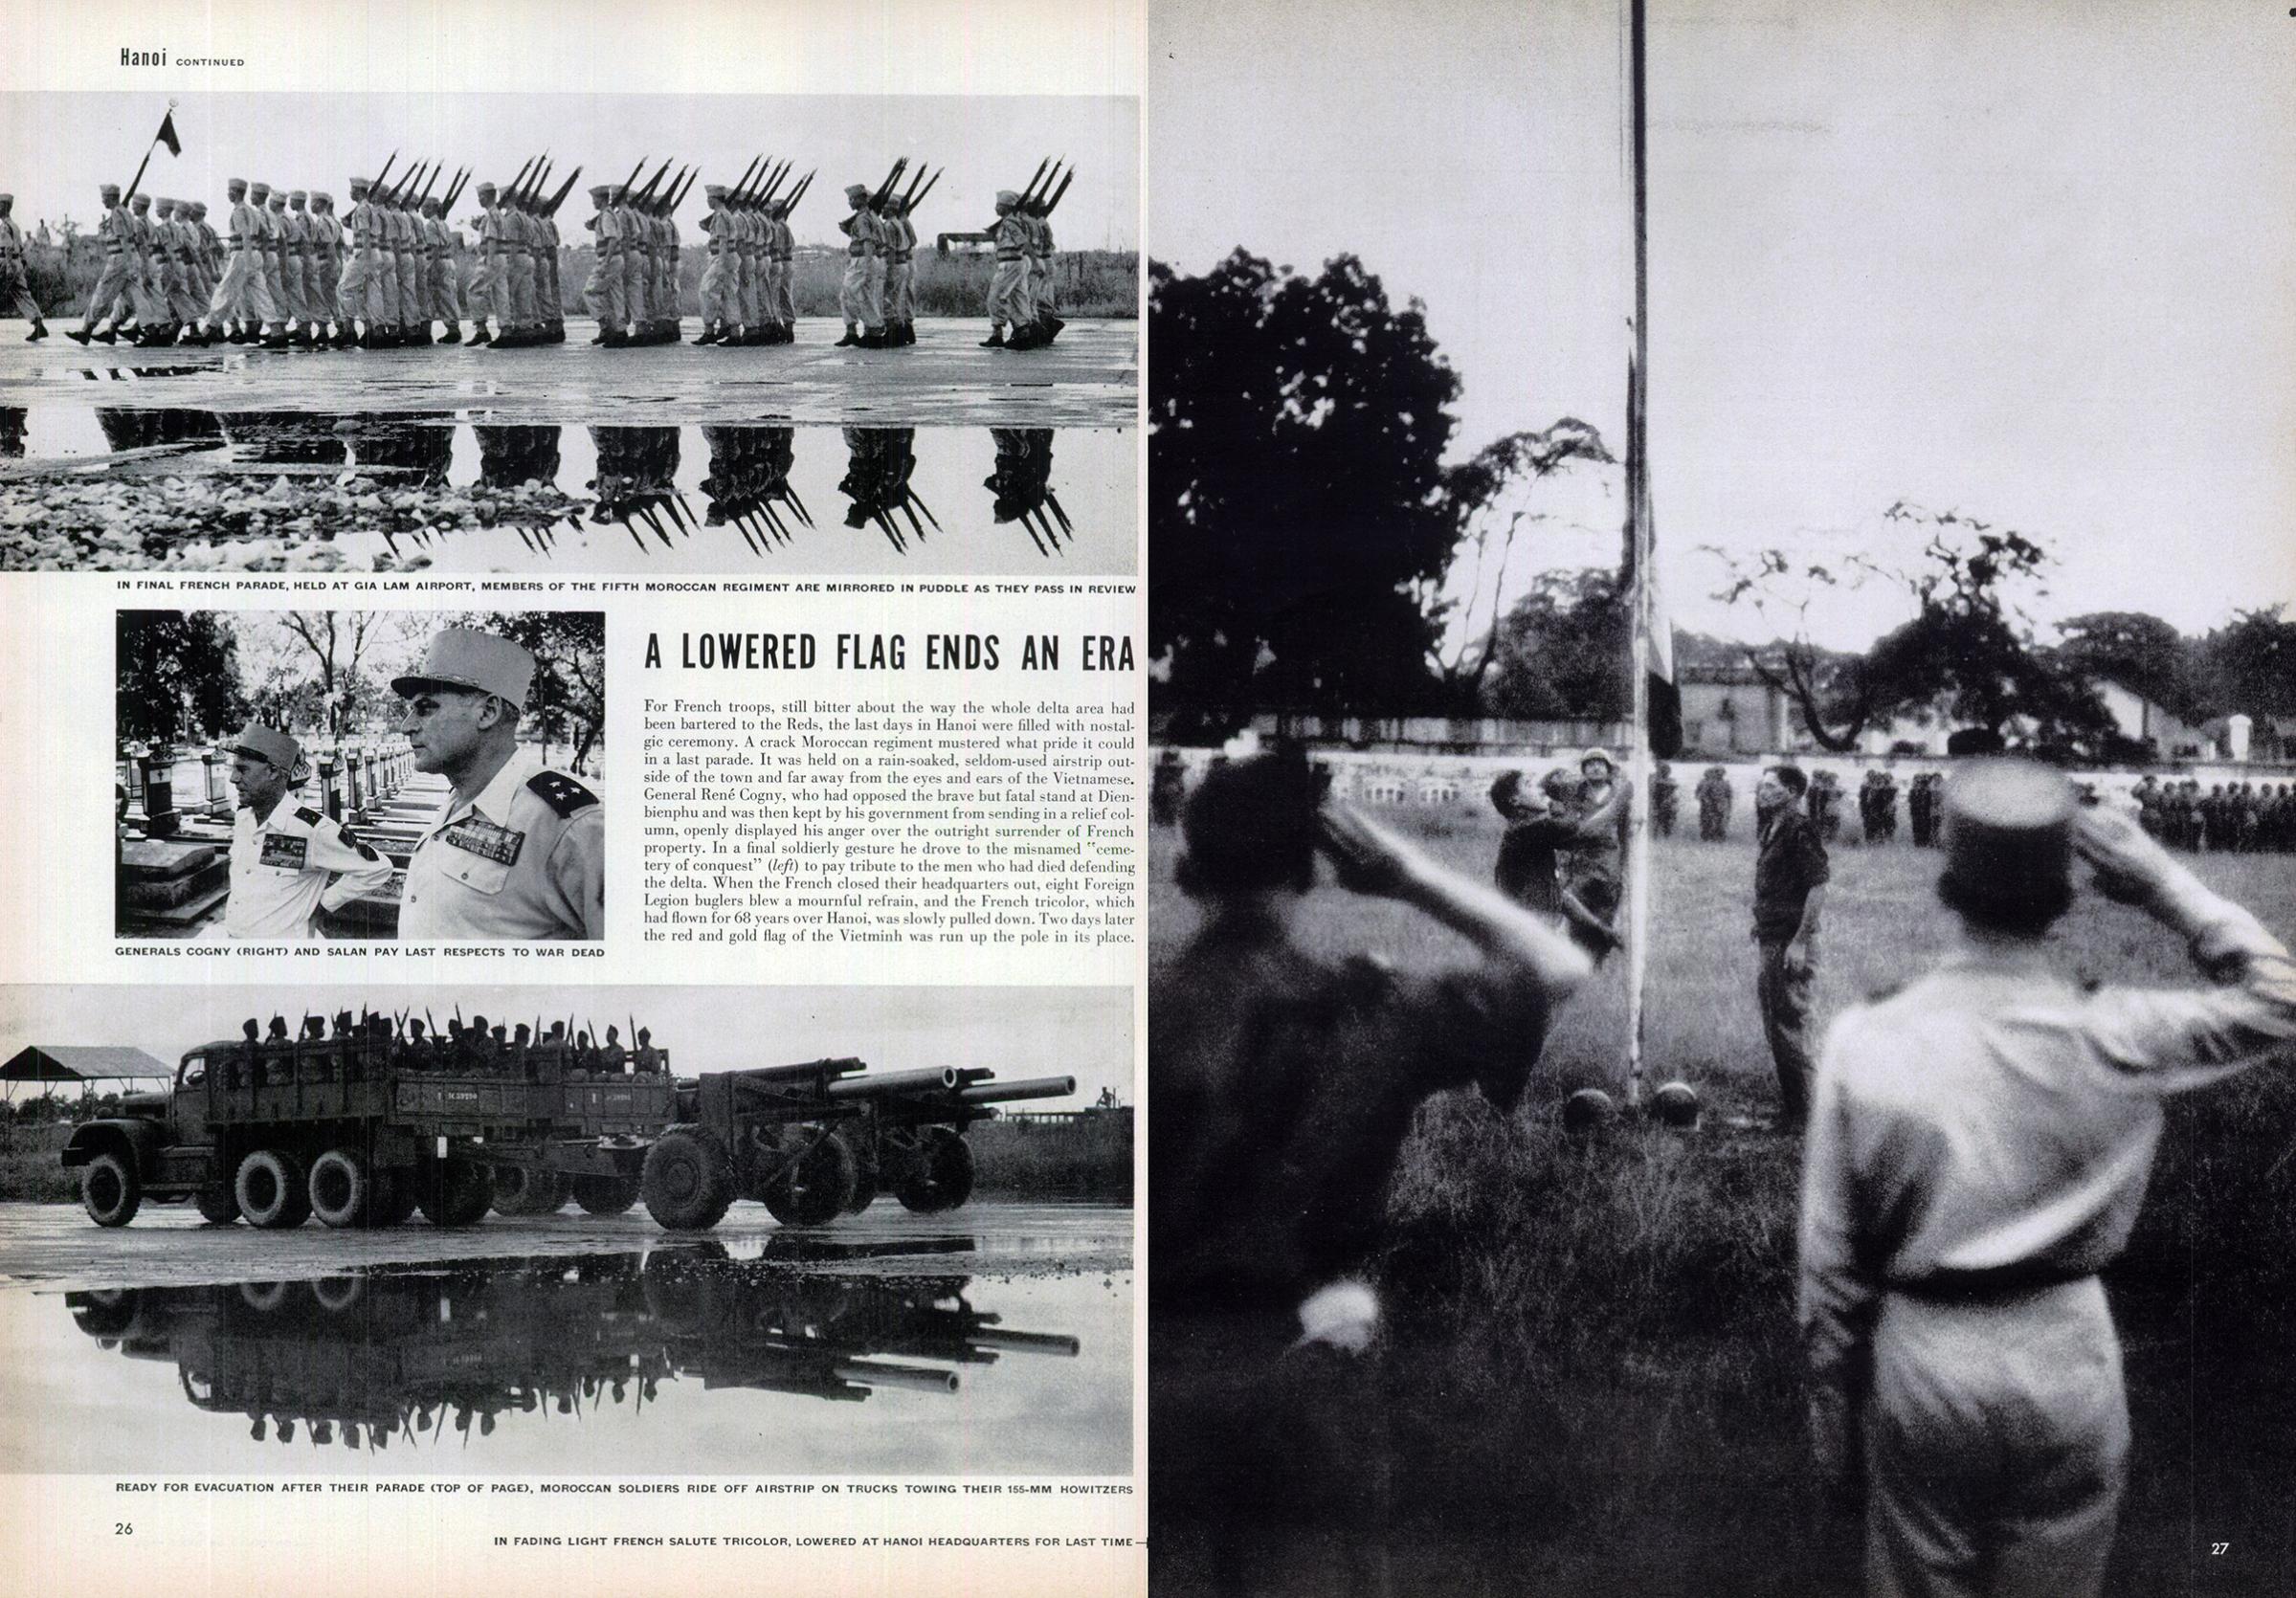 Hanoi's Red Masters Take Over from the Oct. 25, 1954 issue of LIFE magazine. All photos by Howard Sochurek.